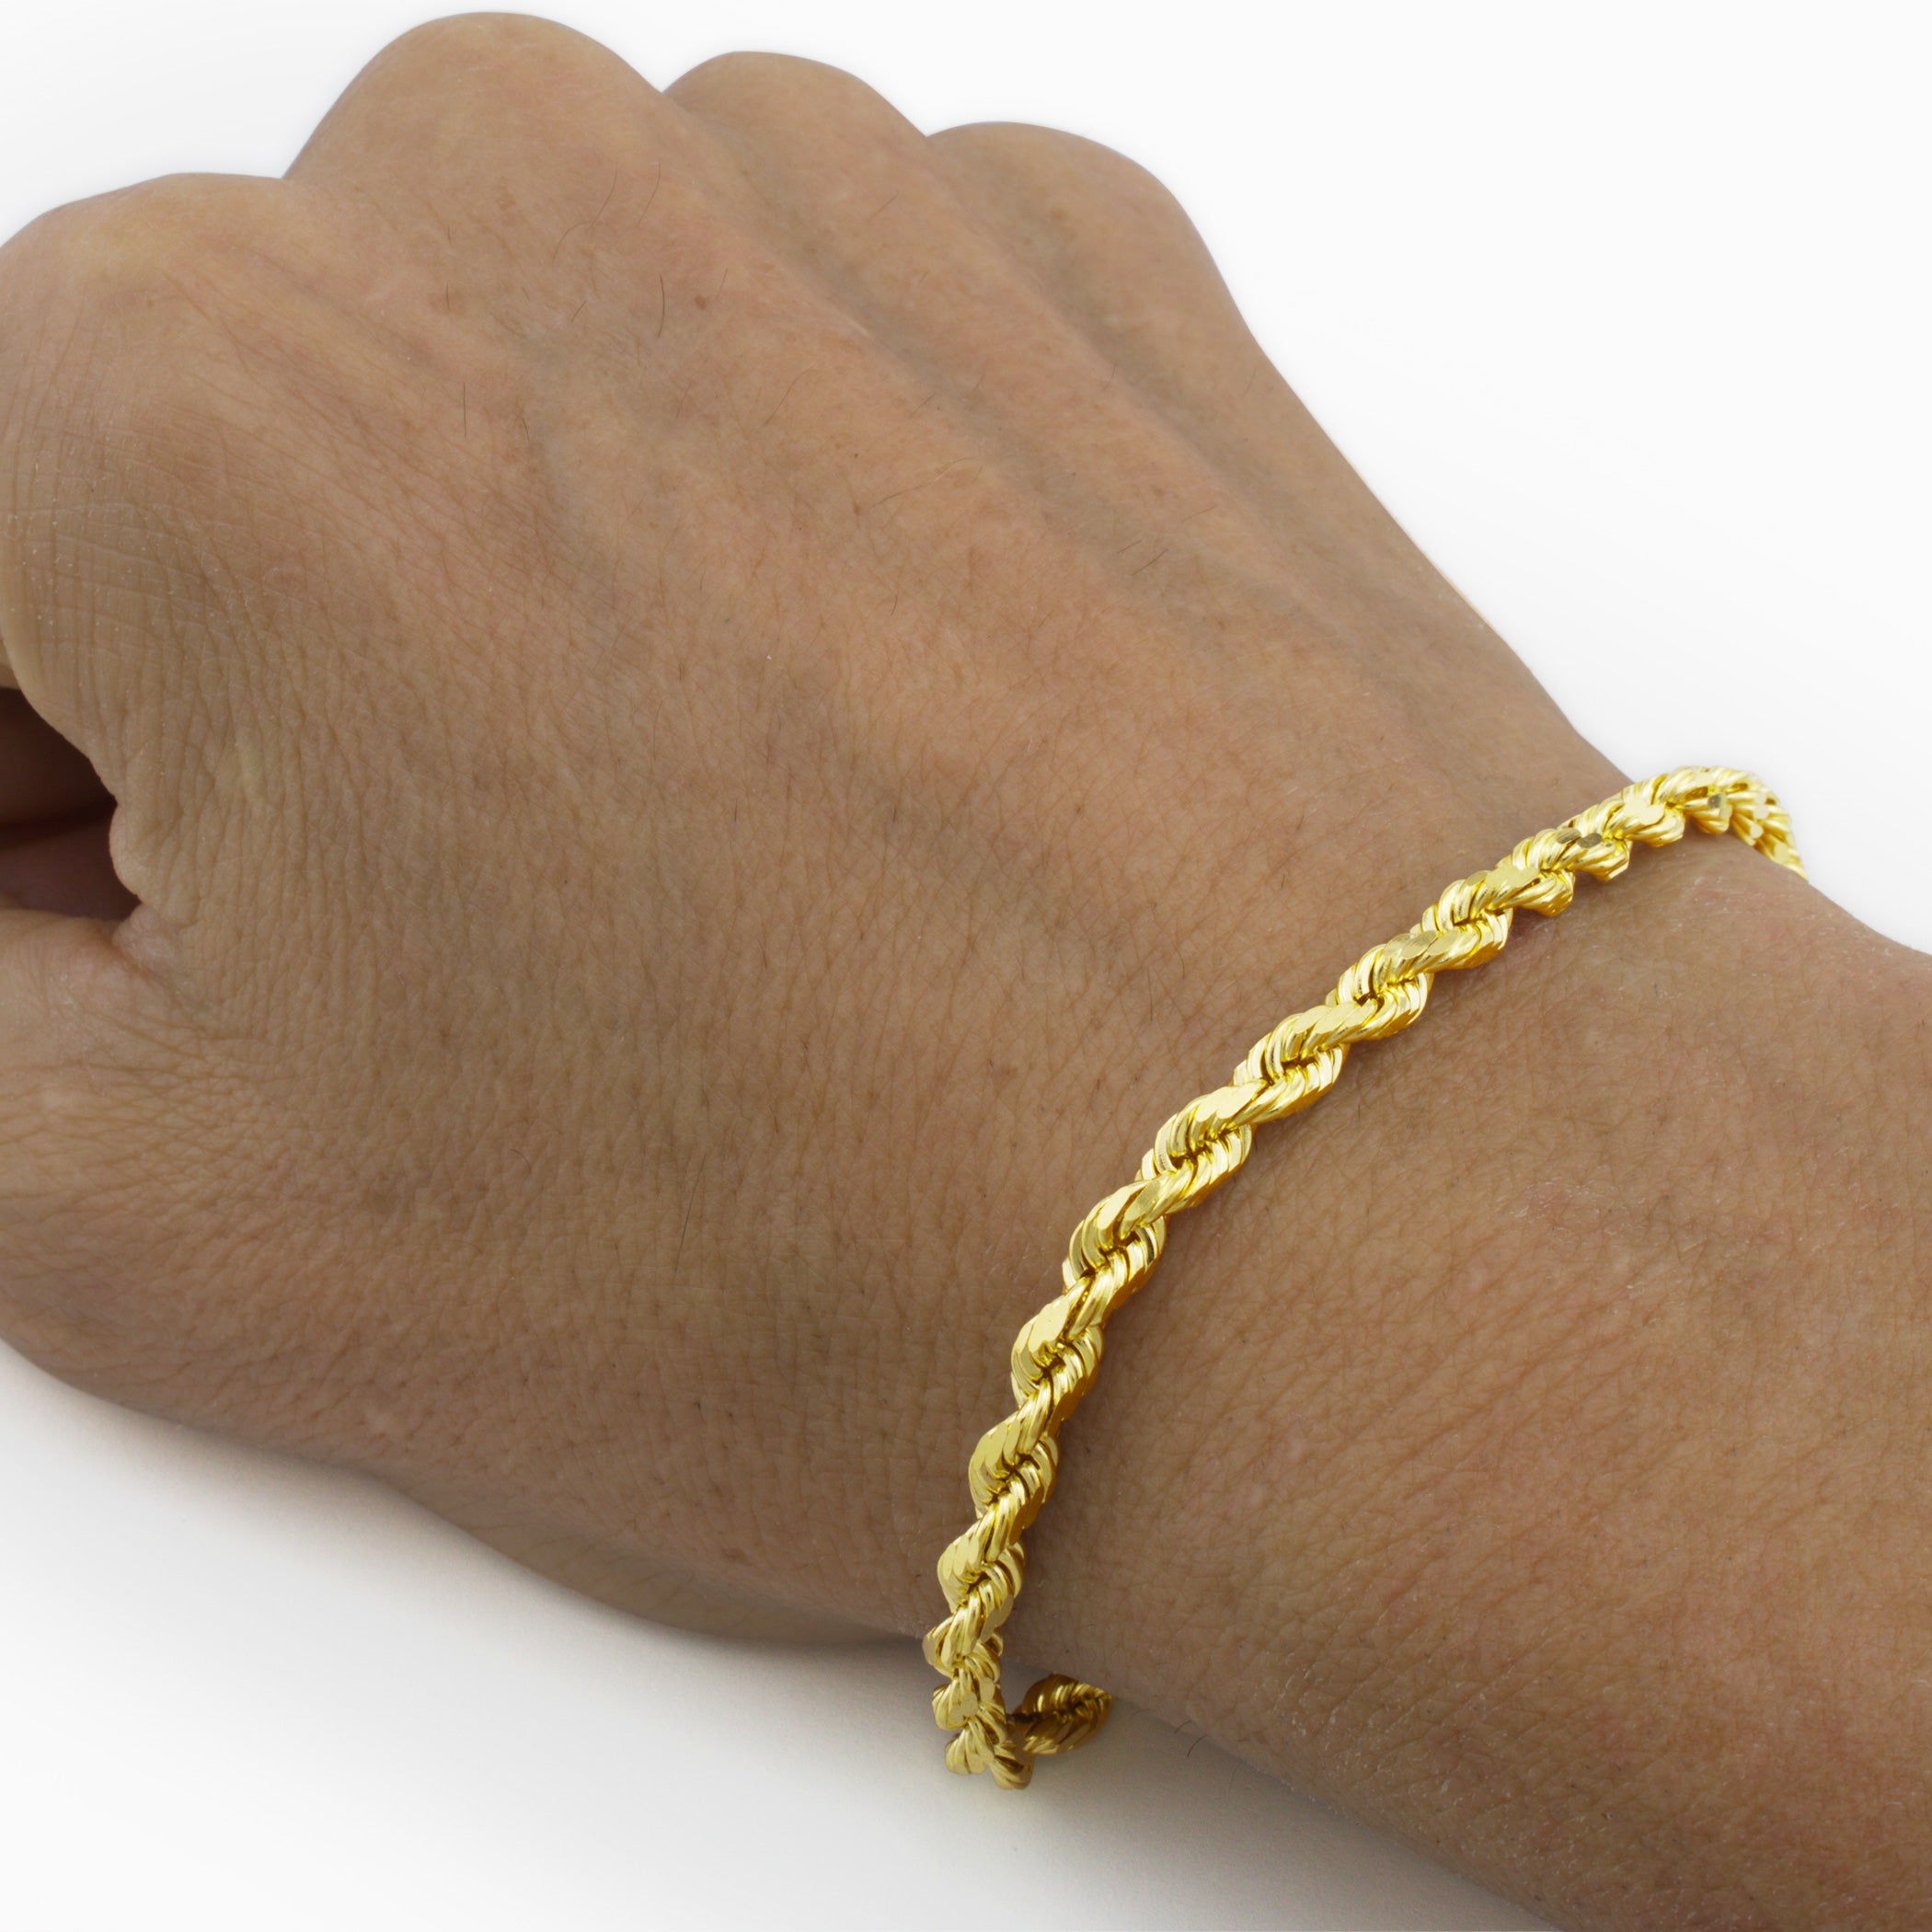 Chic 10K 1.5mm Solid Rope Bracelet | Delicate and Dazzling